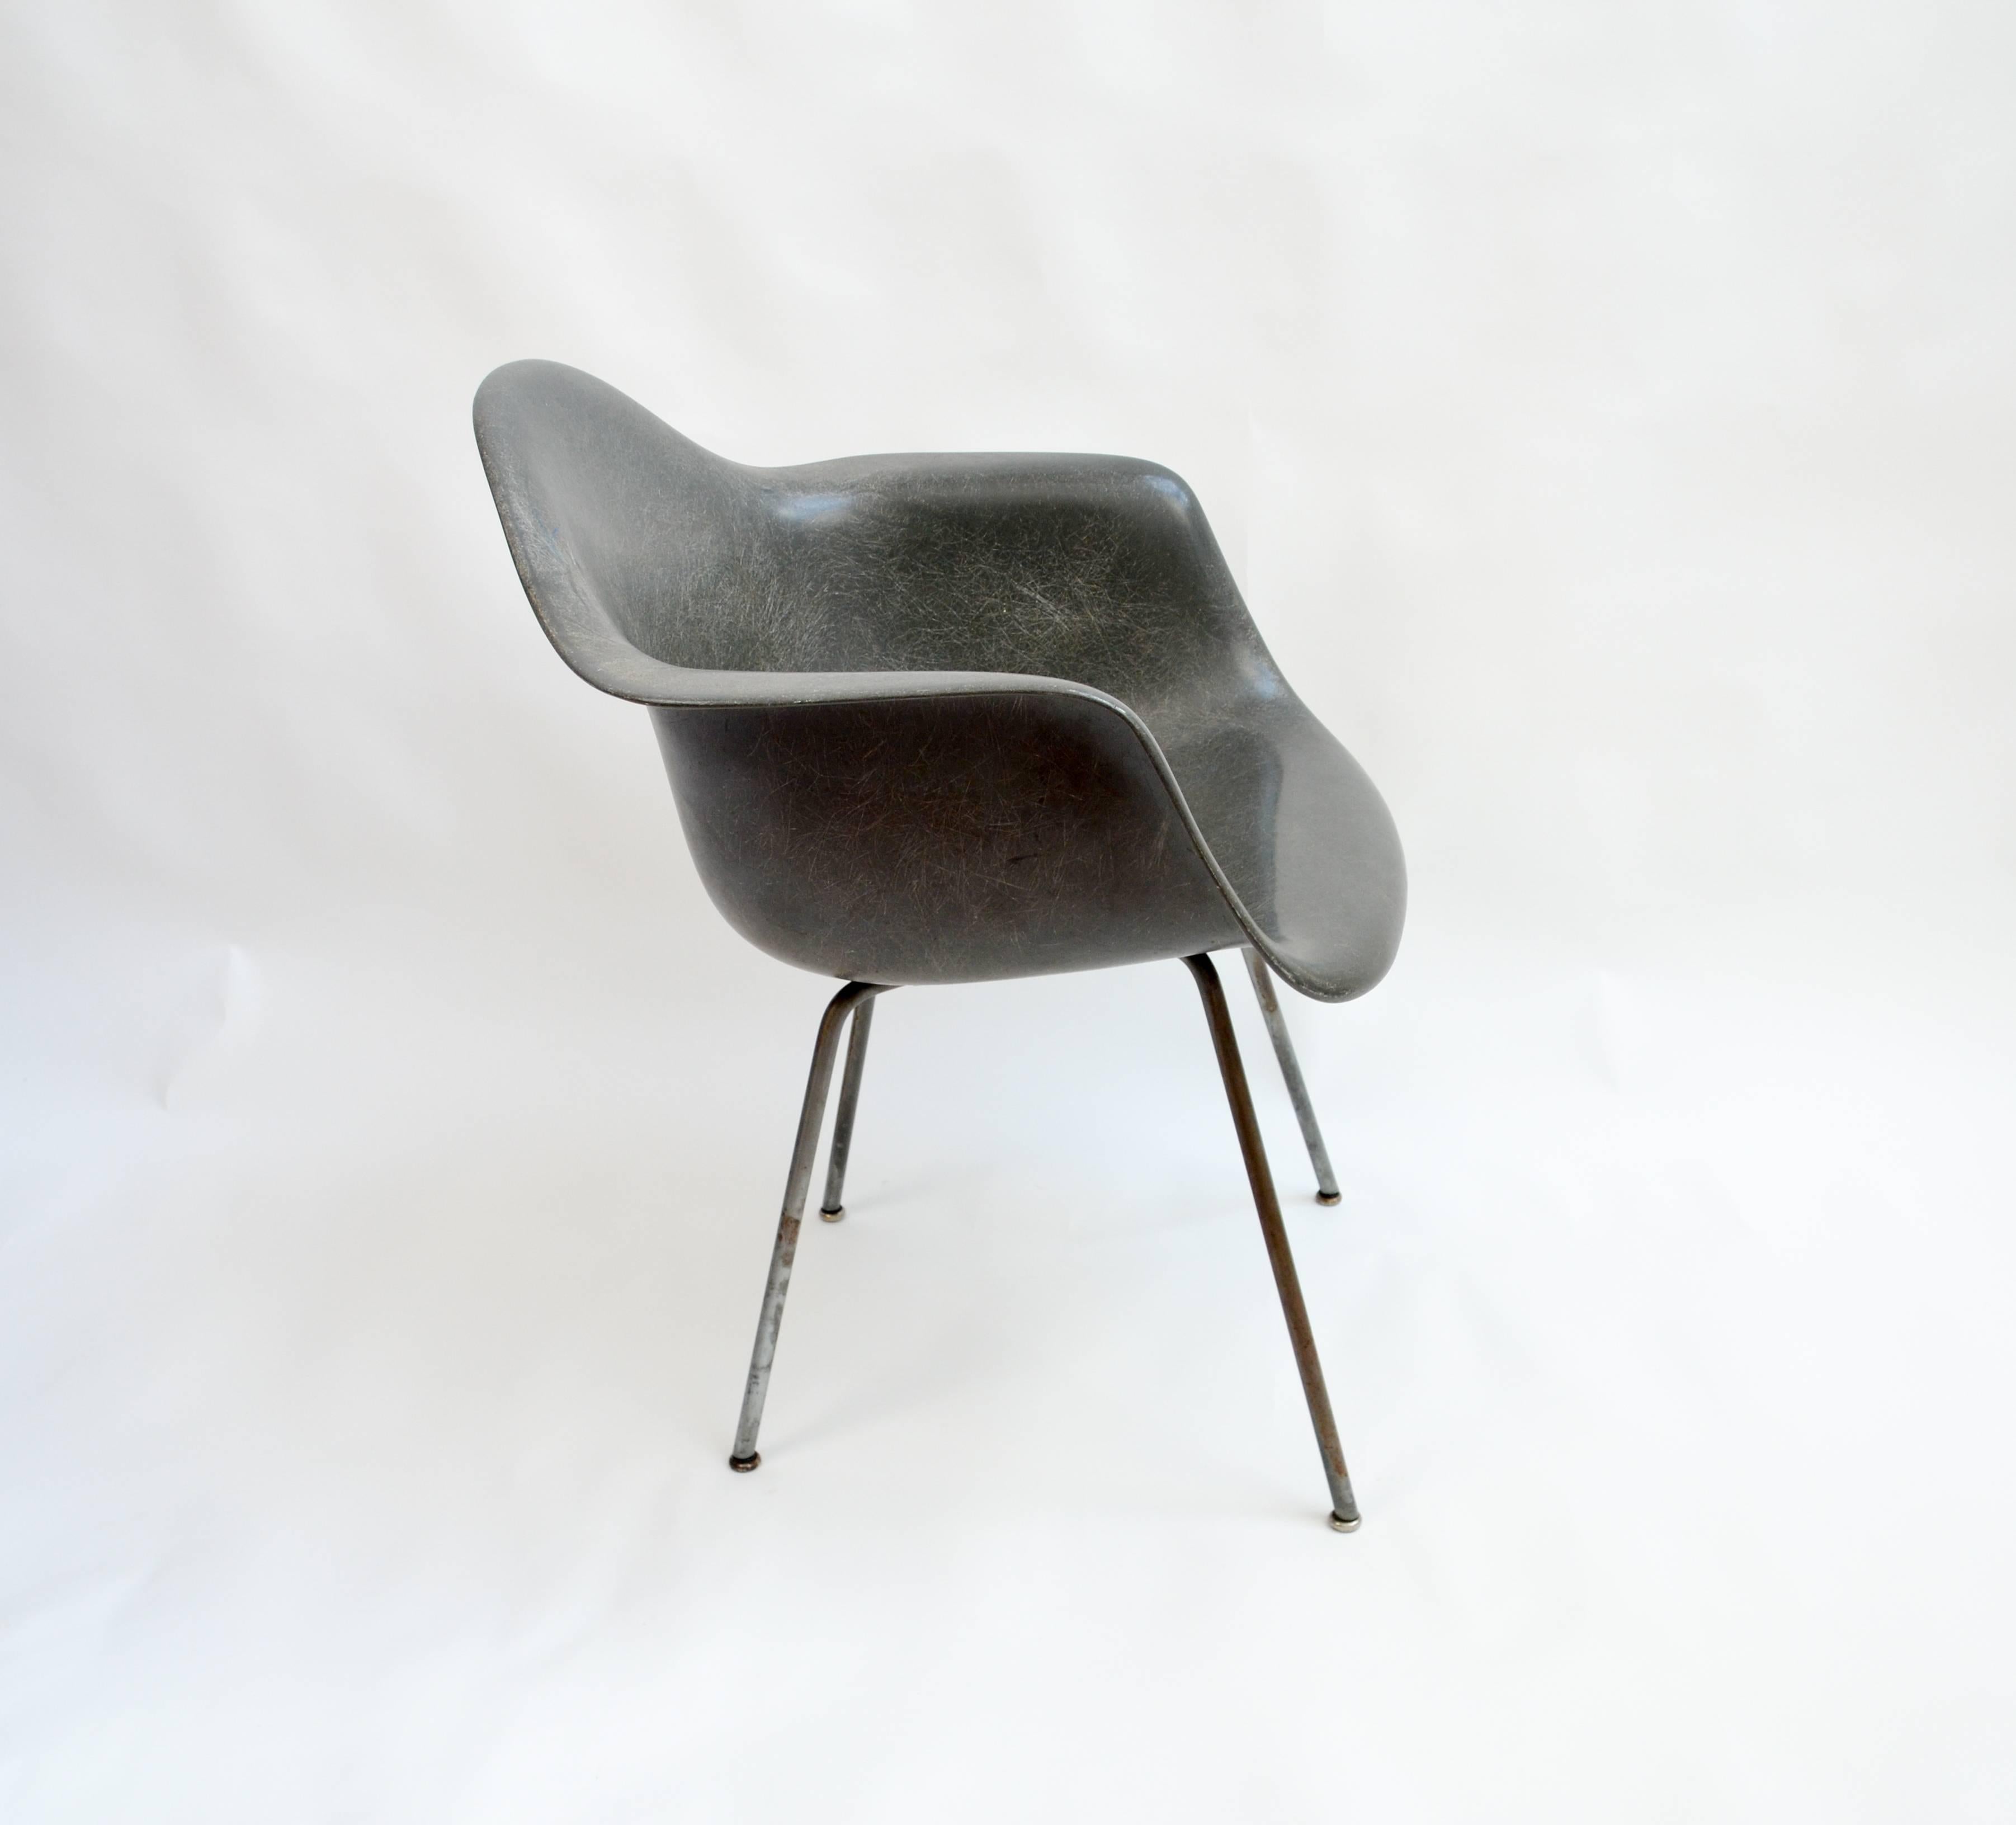 Early "Plastic armchair" by Charles Eames, 1950-1953.
This grey DAX armchair is all original, has a non-rope edge, and the original Herman Miller label.